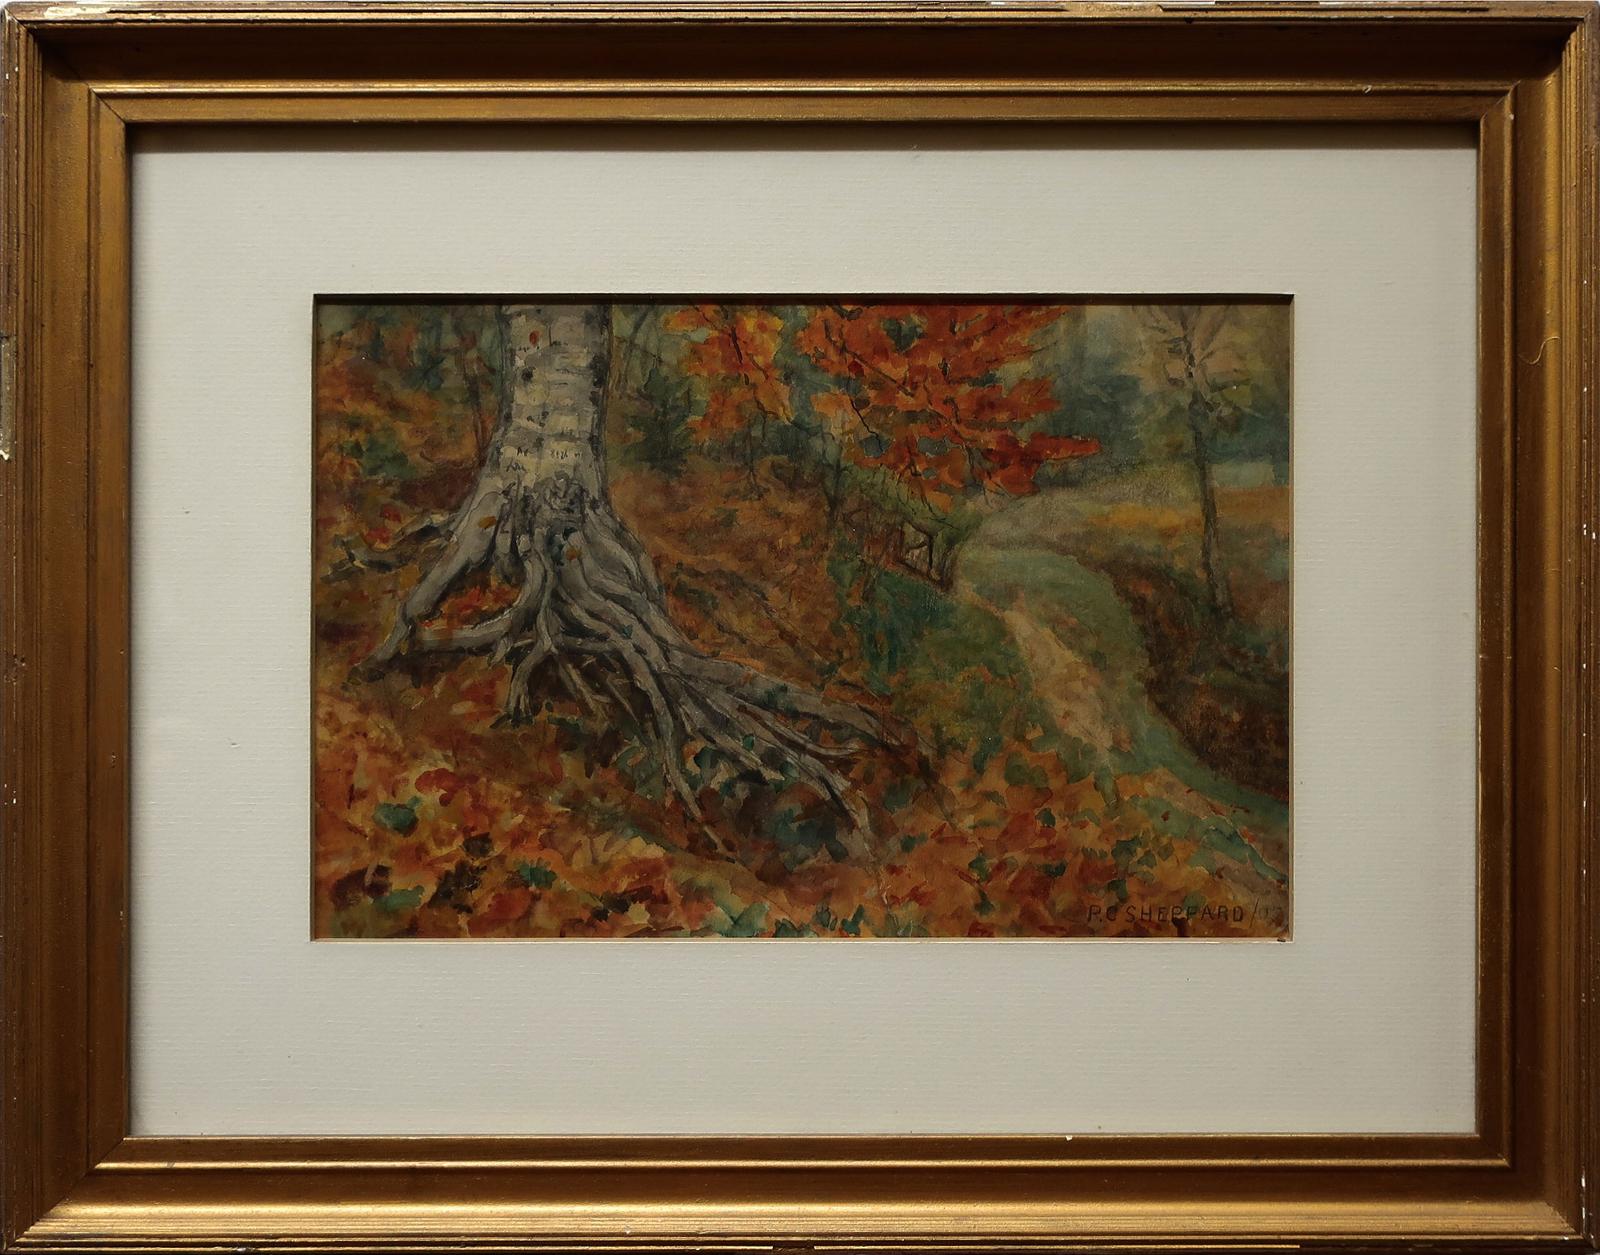 Peter Clapham (P.C.) Sheppard (1882-1965) - Untitled (Twisted Roots - Autumn)